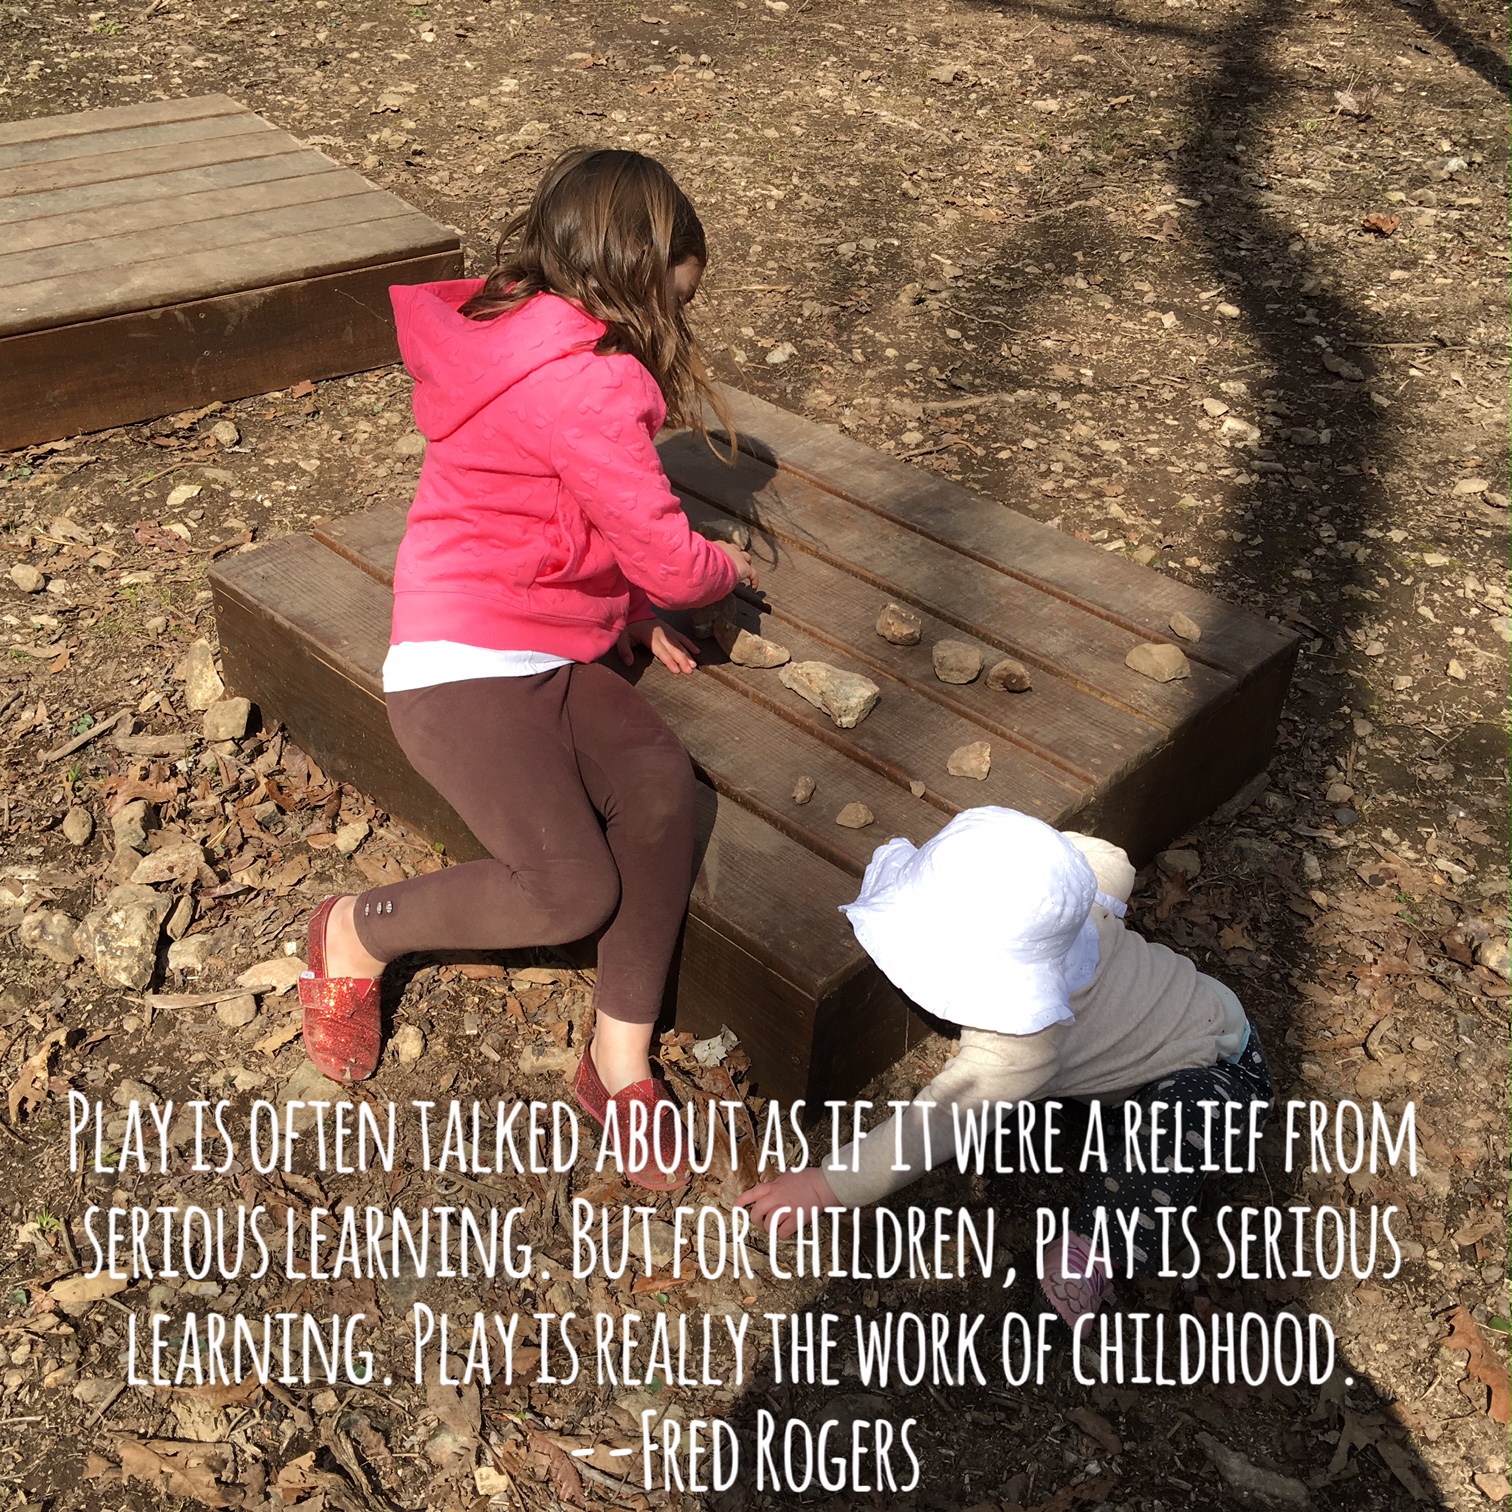 Text on image of a child sitting at an outdoor table "Play is often talked about as if it were a relief from serious learning. But for children, play is serious learning. Play is really the work of childhood. --Fred Rogers" 